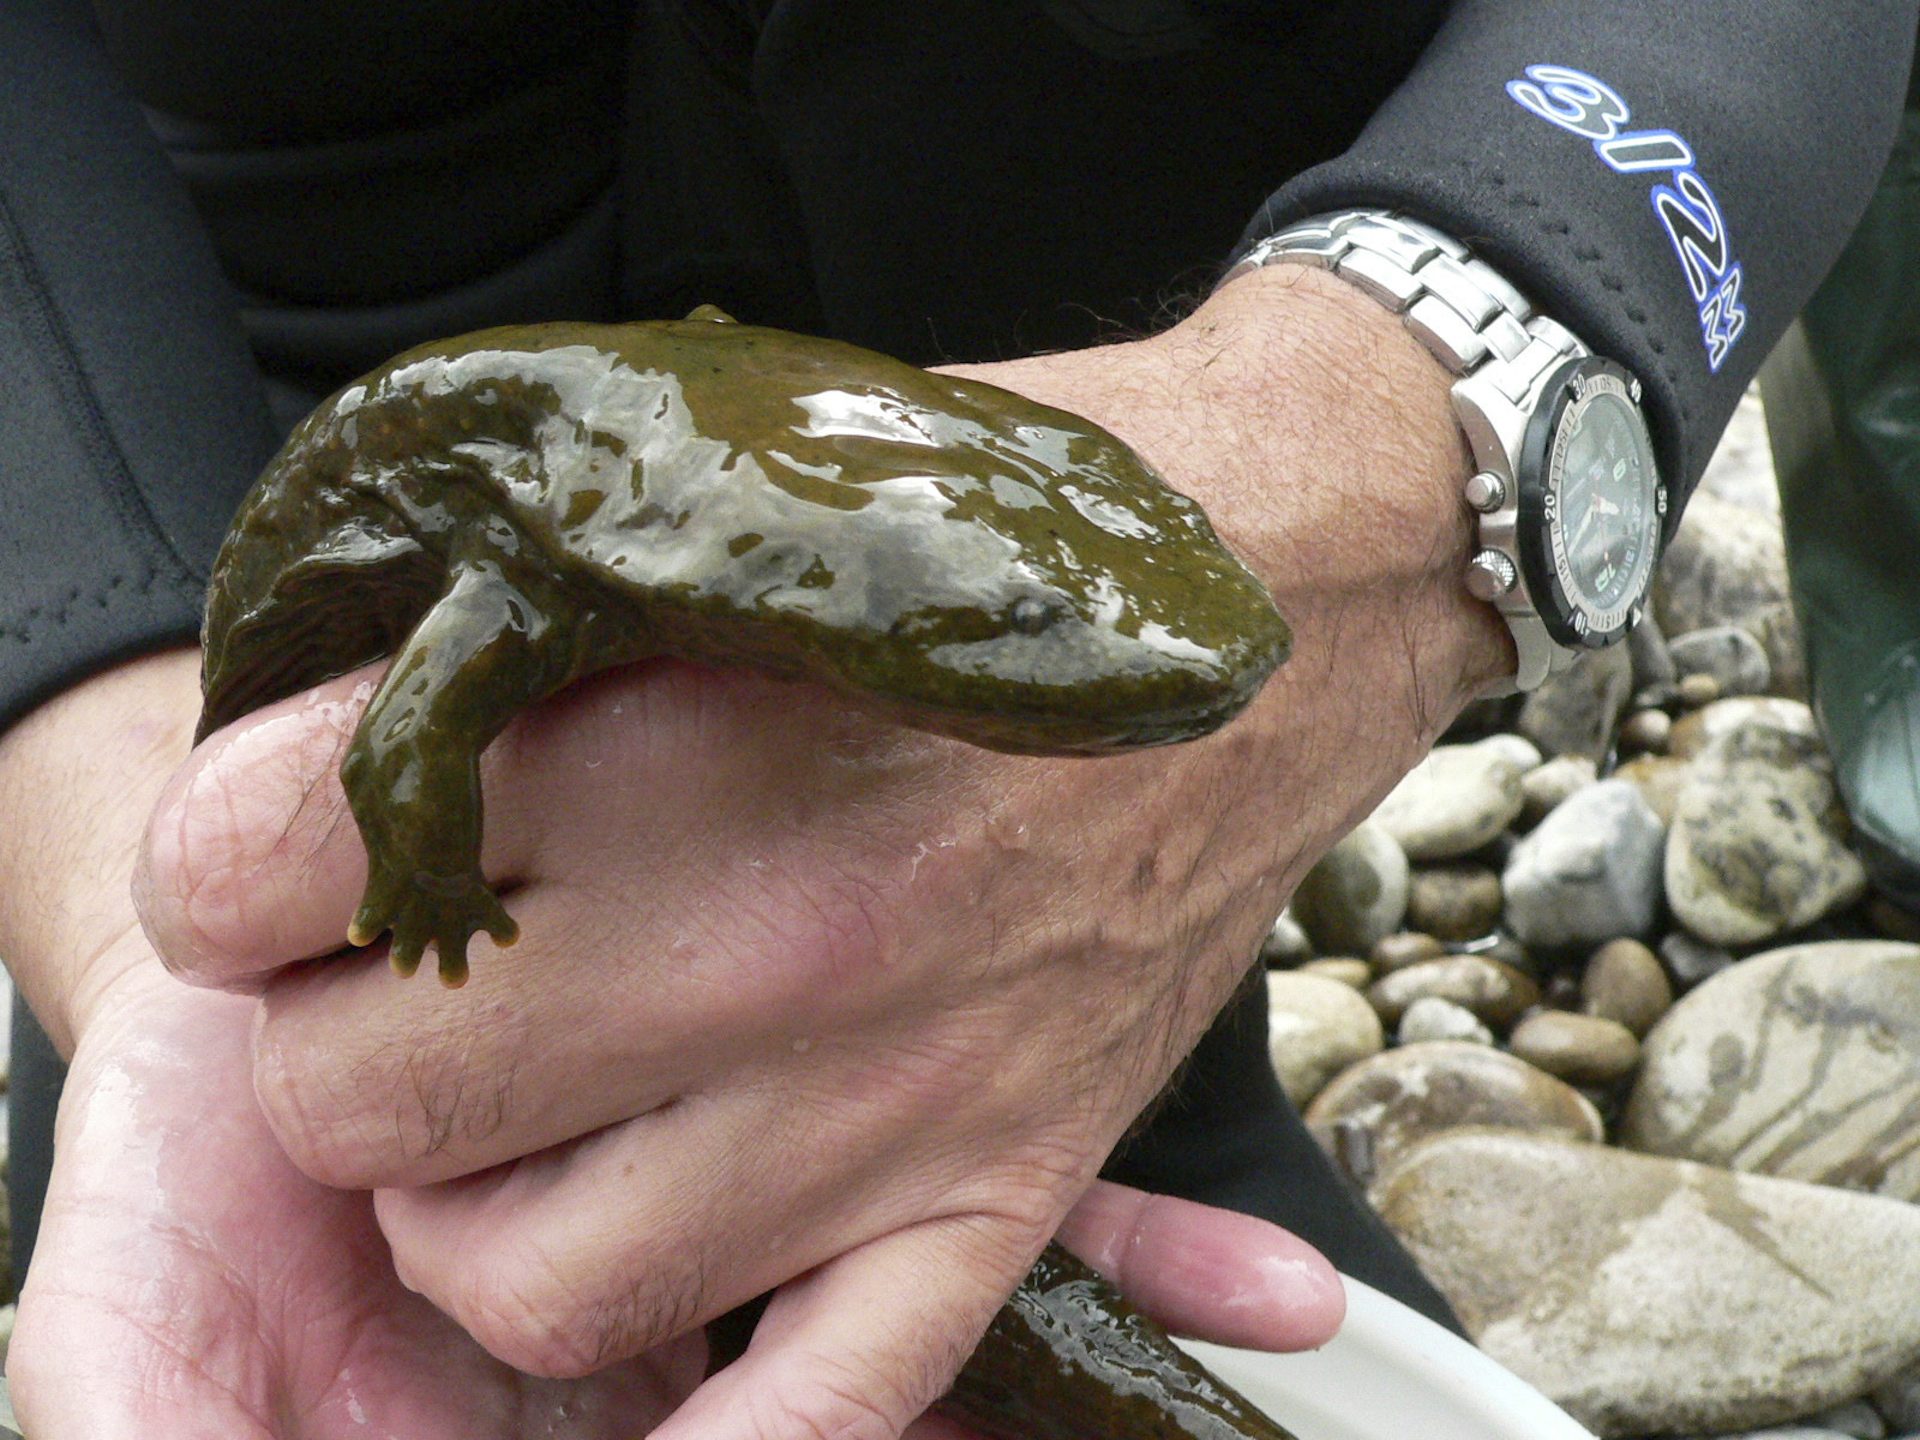 This undated photo provided by Peter Petokas, a research associate at the Clean Water Institute of Lycoming College's biology department, shows an adult Eastern hellbender, an aquatic salamander that can grow up to two feet long, making them the largest North American amphibian according to the Center for Biological Diversity.